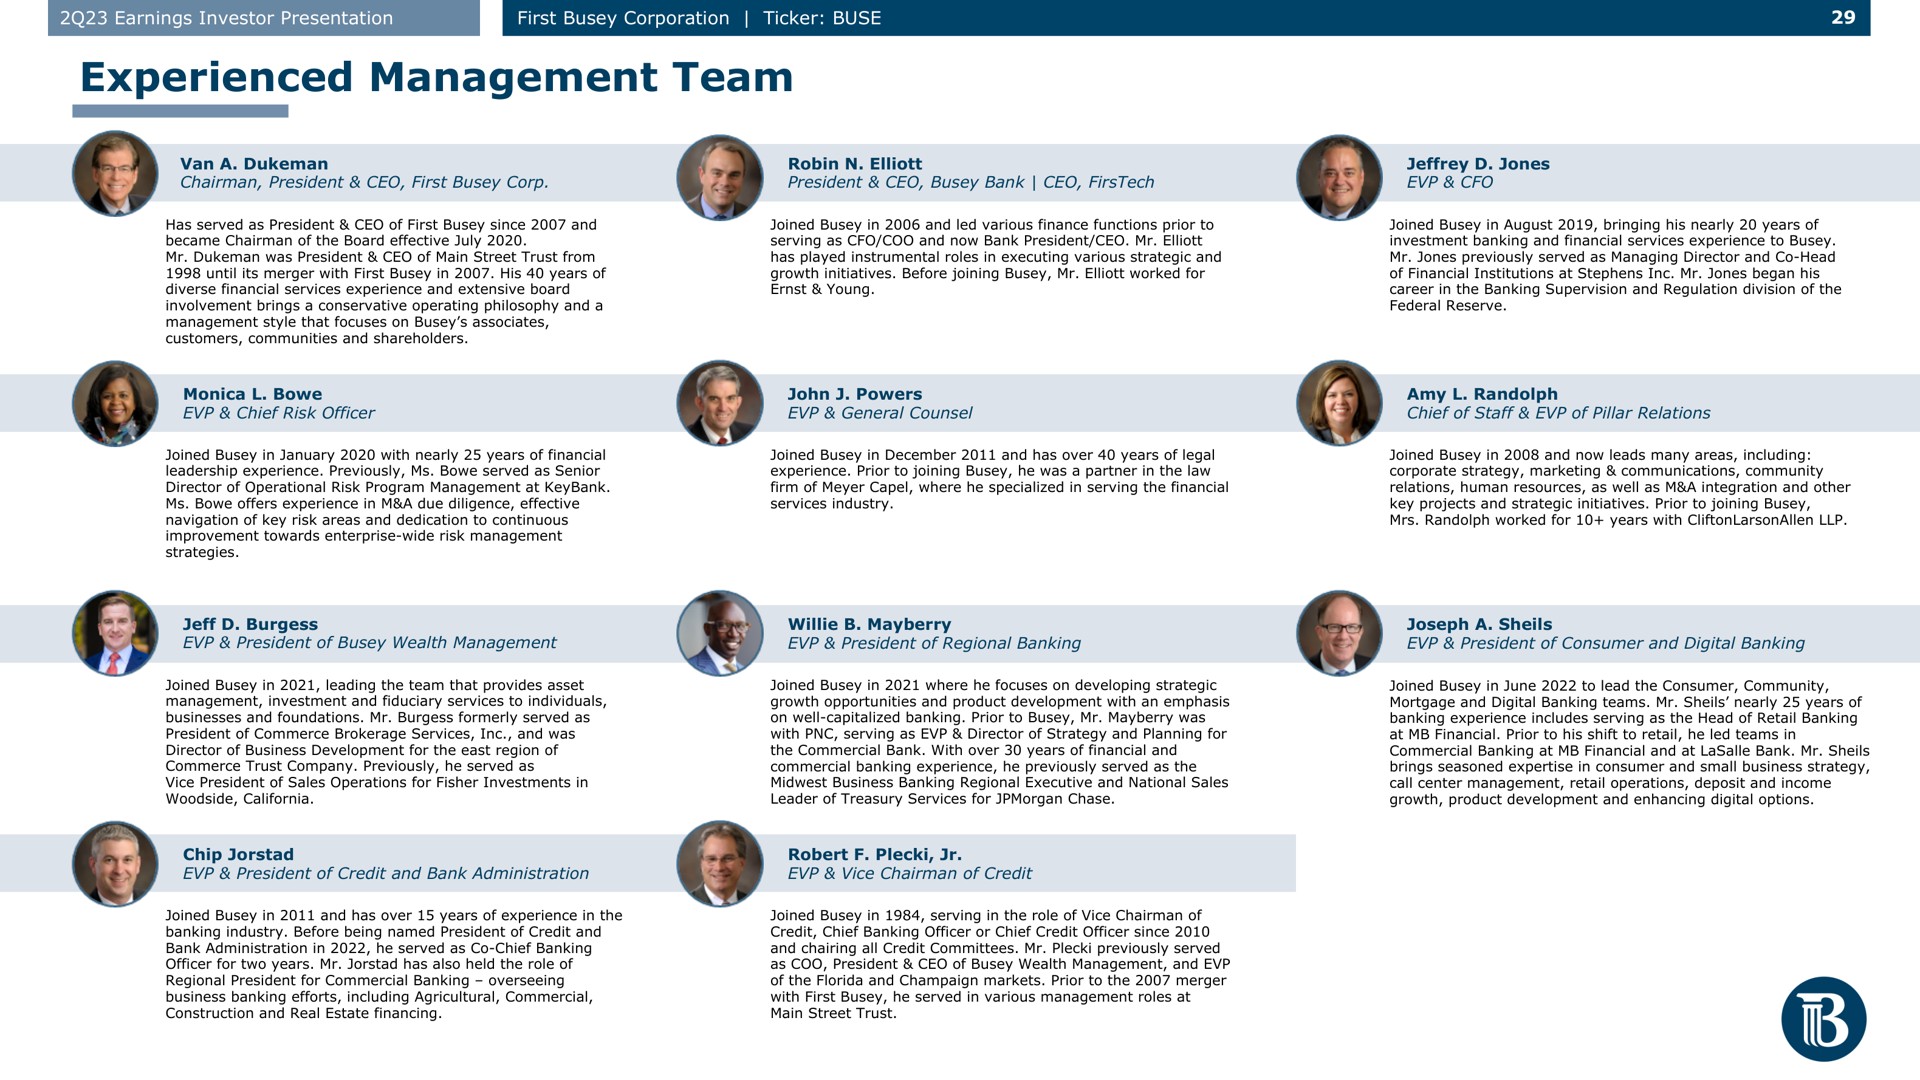 experienced management team | First Busey